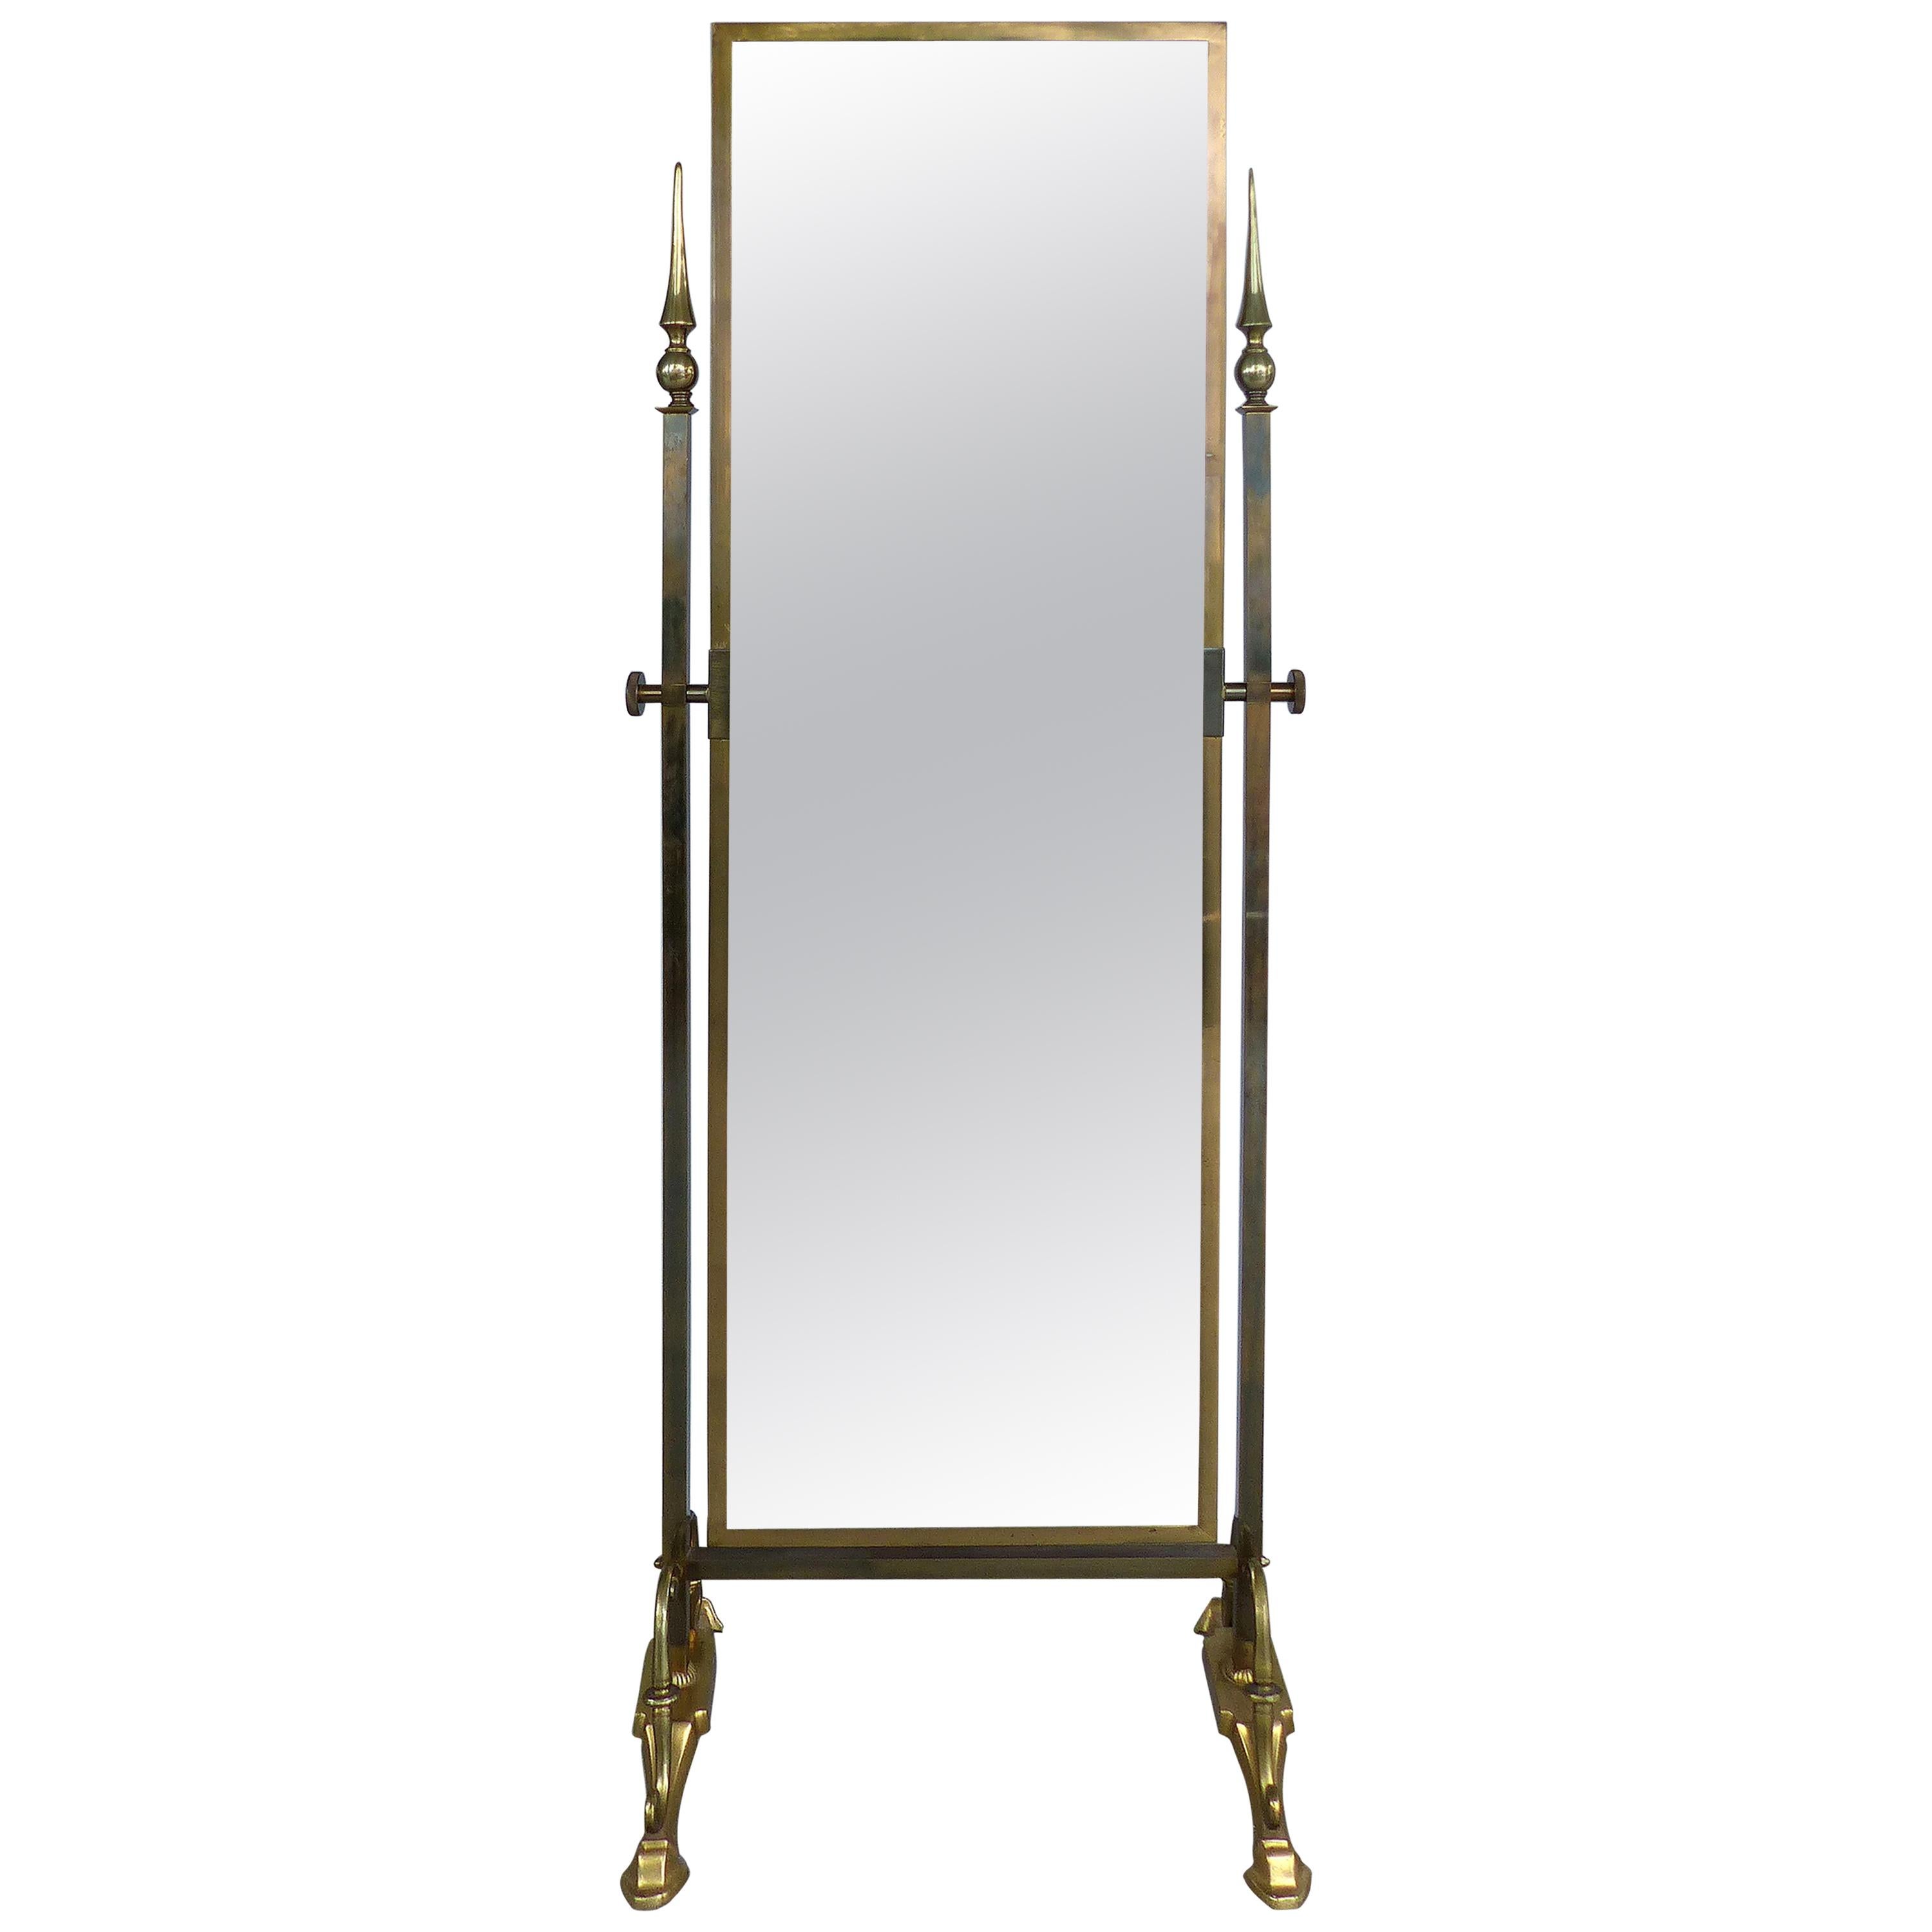 Solid Brass Cheval Mirror by Glo-Mar Artworks Inc. New York